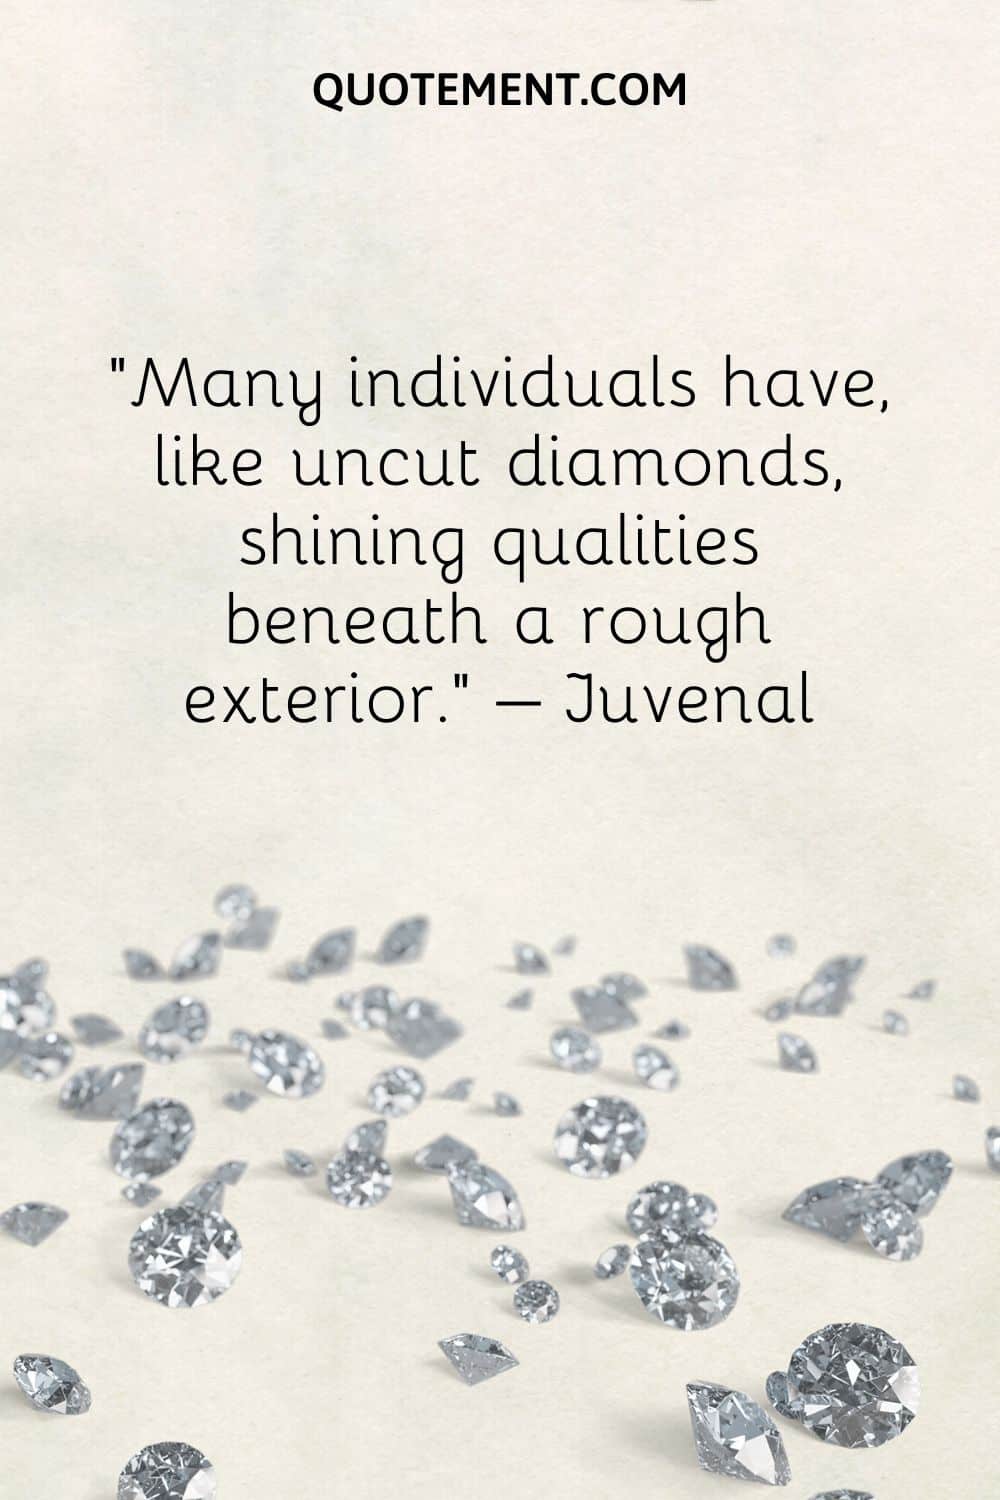 Many individuals have, like uncut diamonds, shining qualities beneath a rough exterior